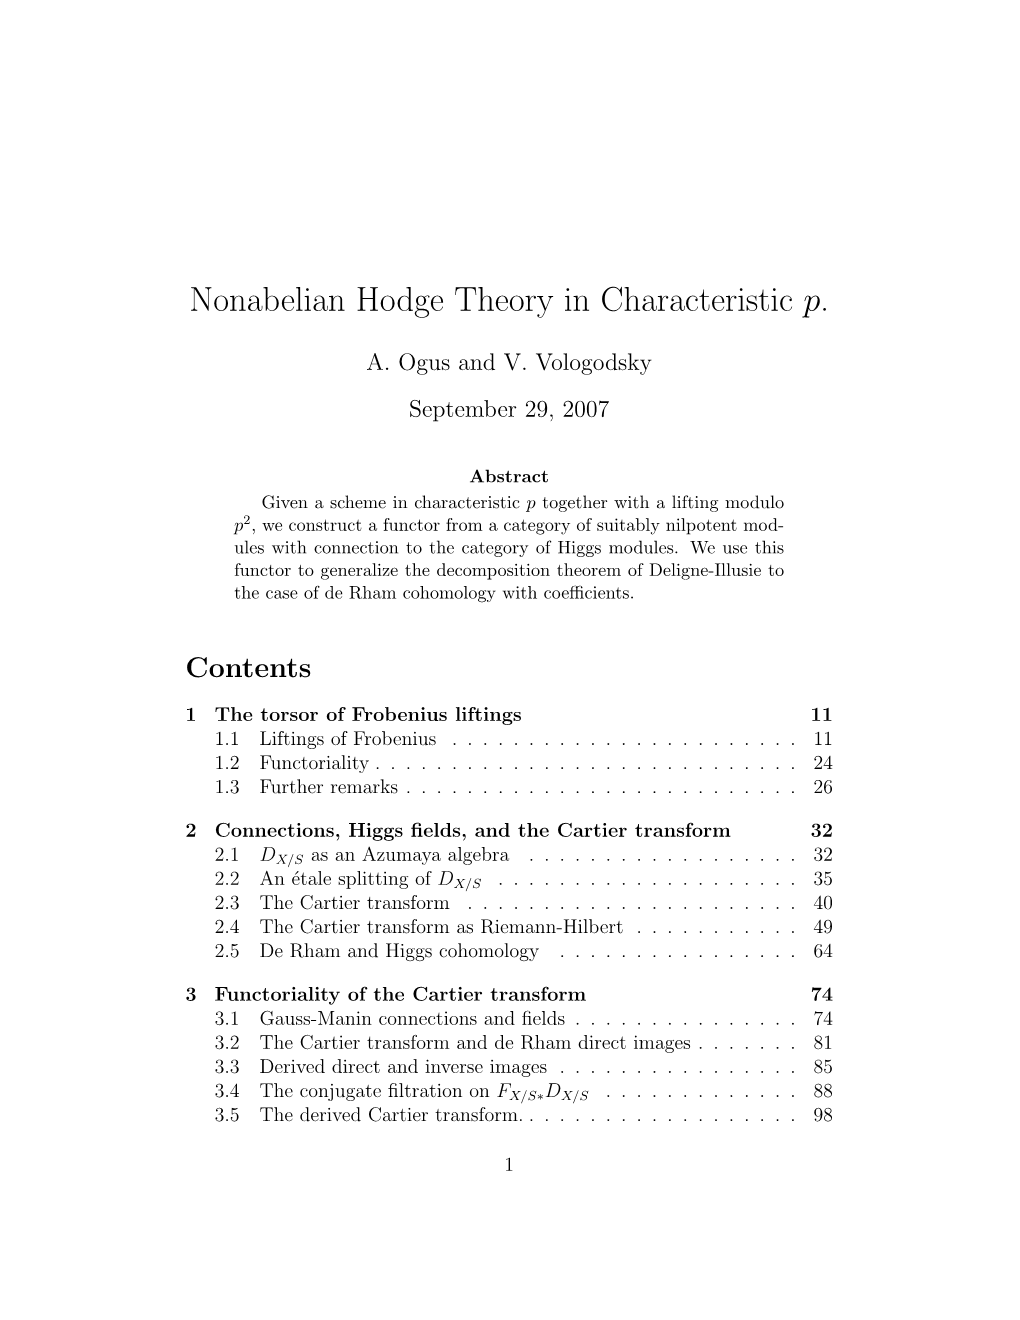 Nonabelian Hodge Theory in Characteristic P